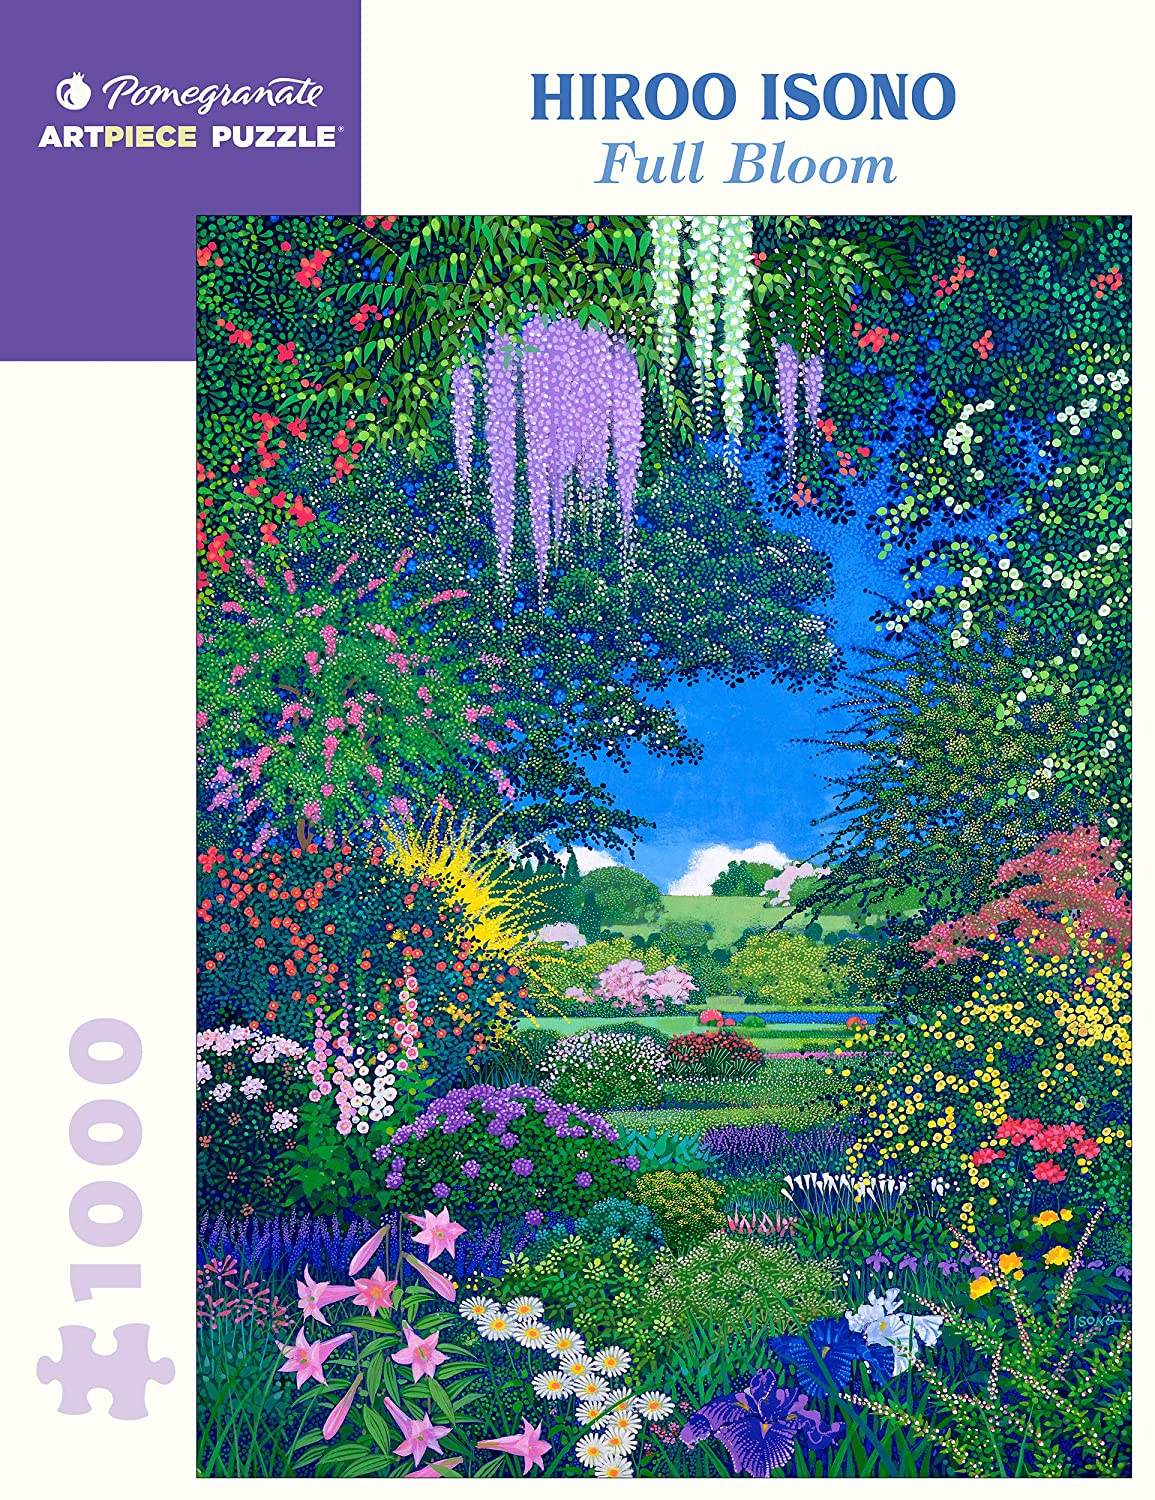 Puzzle: Hiroo Isono - Full Bloom 1000 Pieces